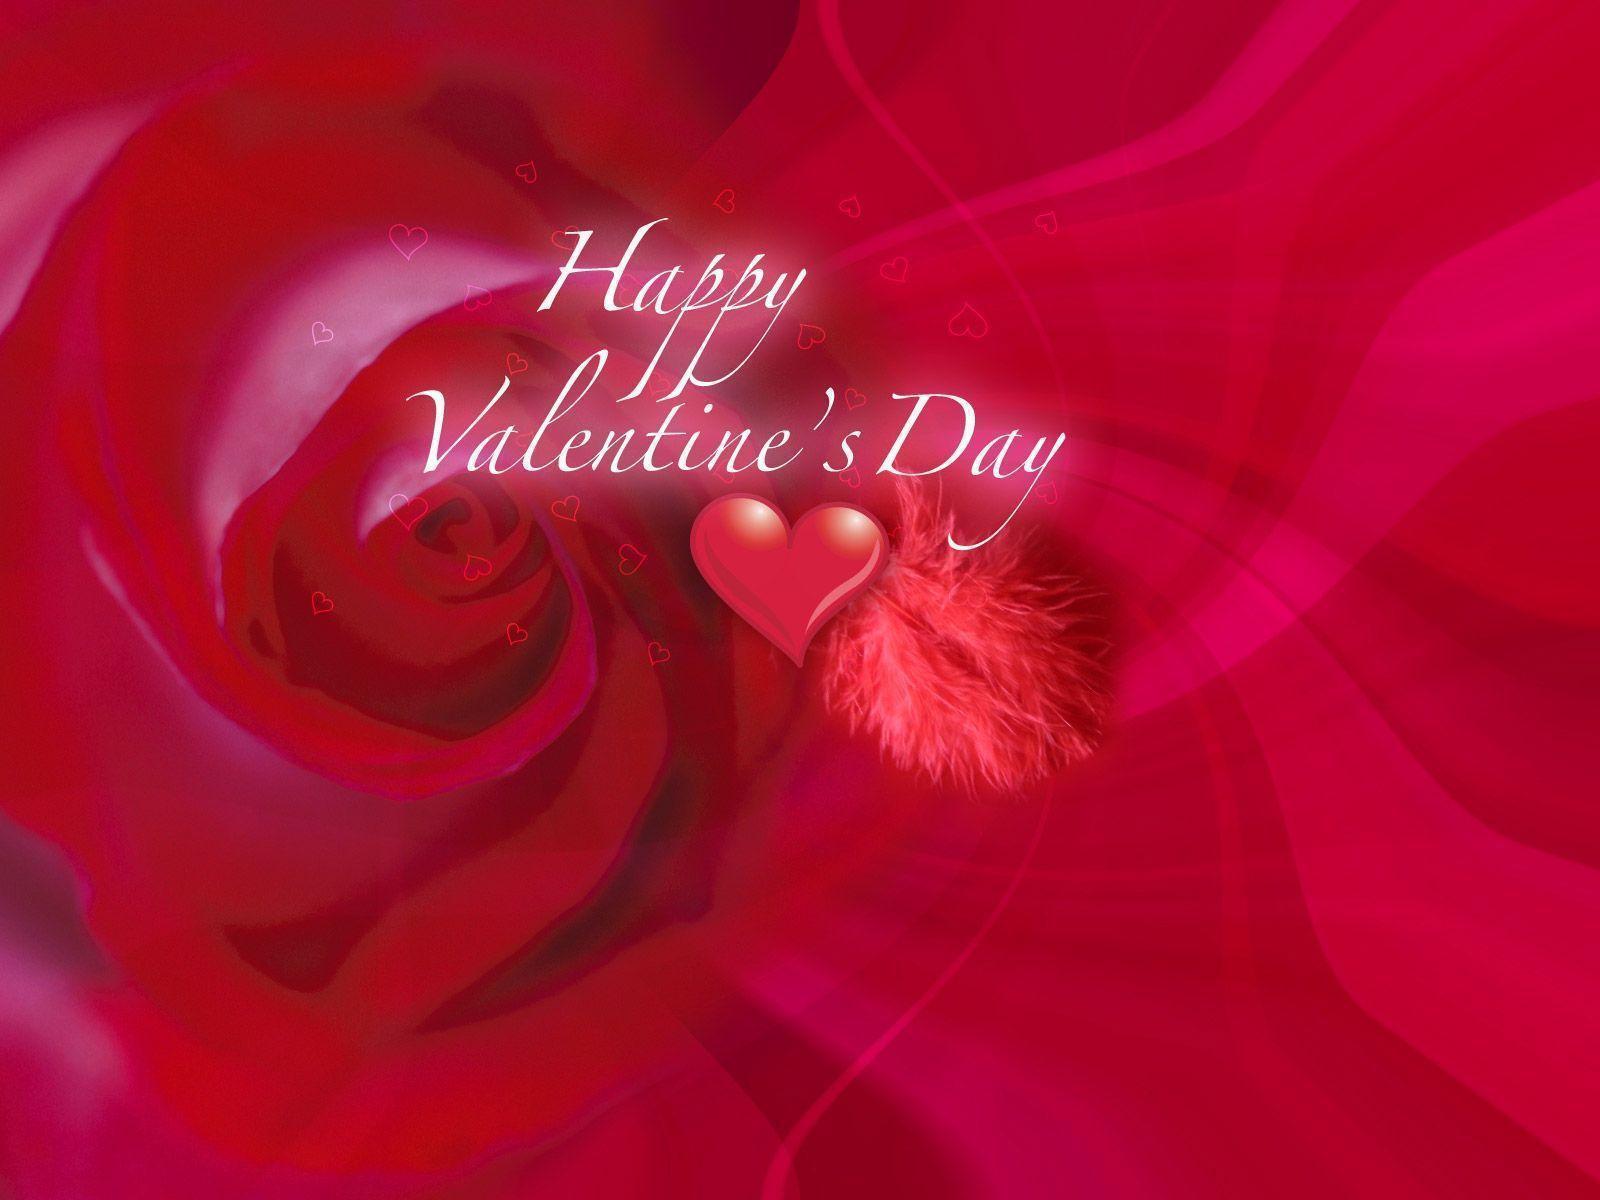 Valentine&;s Day Wishes and Wallpaper